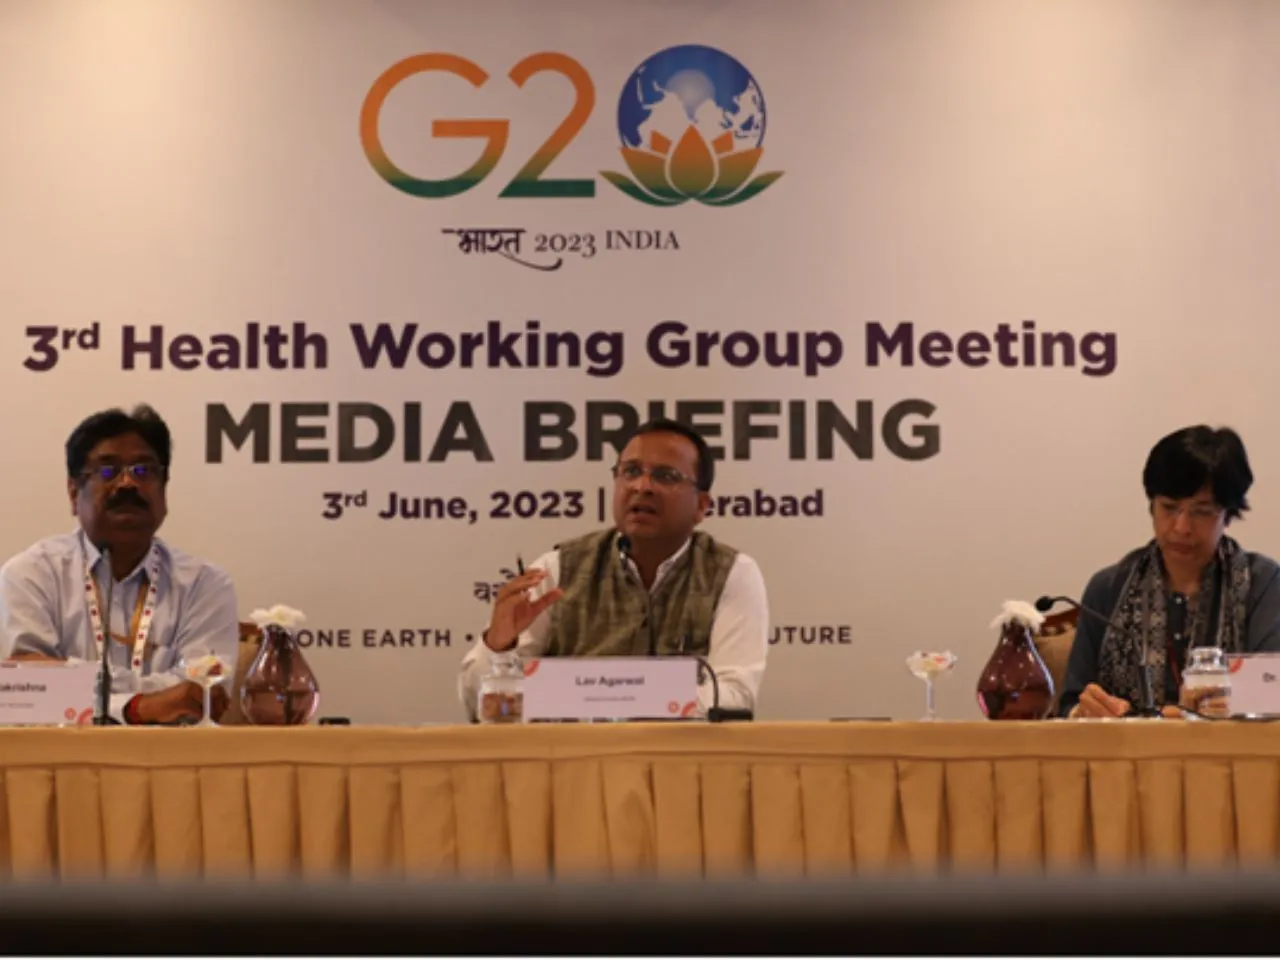 G20 India Health Working Group Meeting Hyderabad